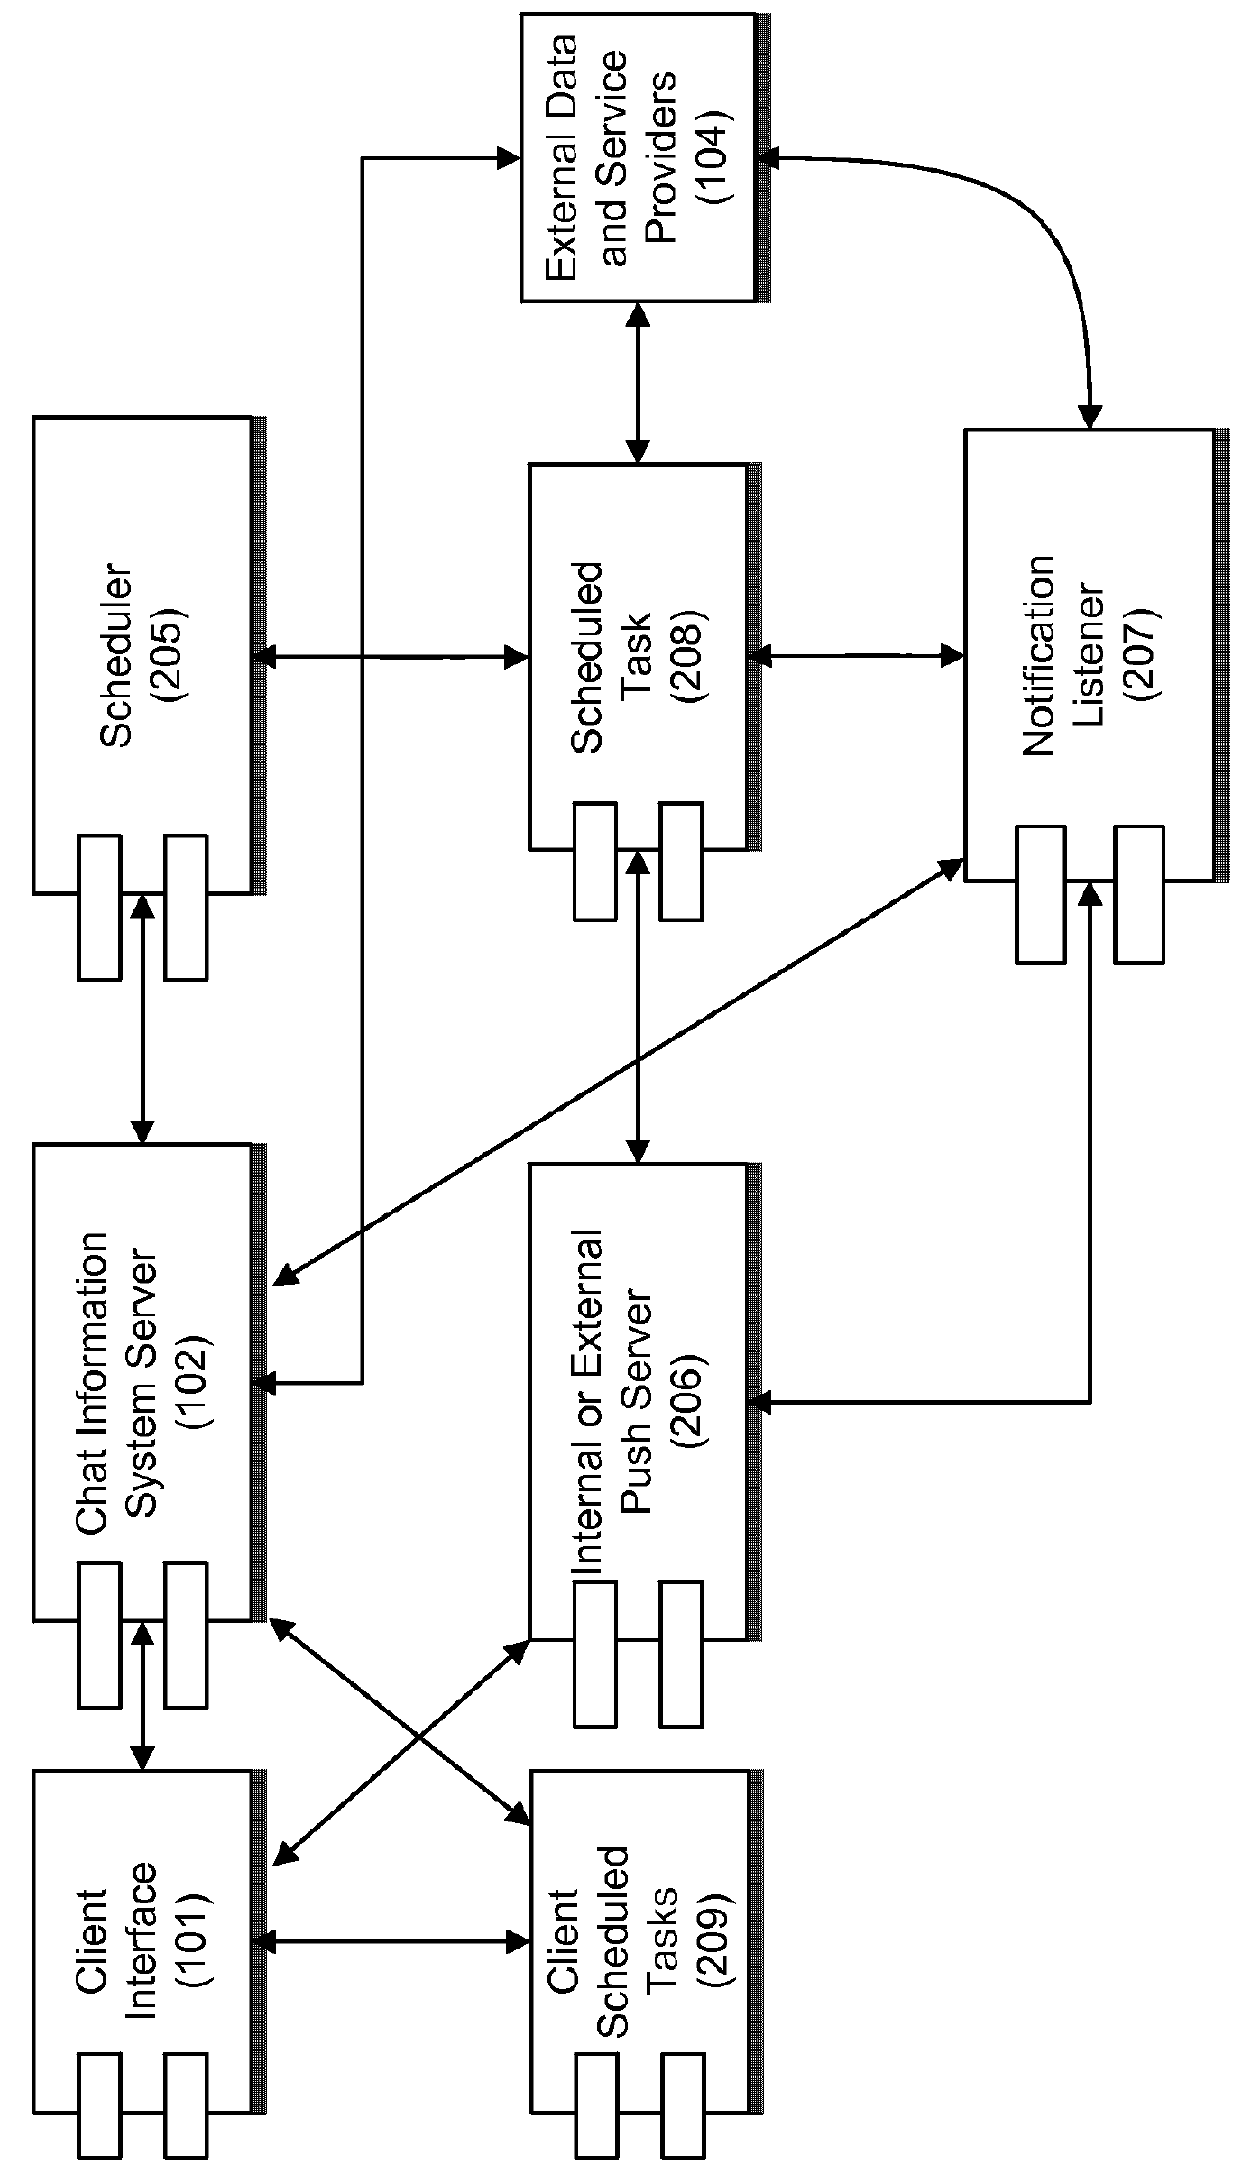 System-initiated interactions and notifications in a chat information system on mobile devices